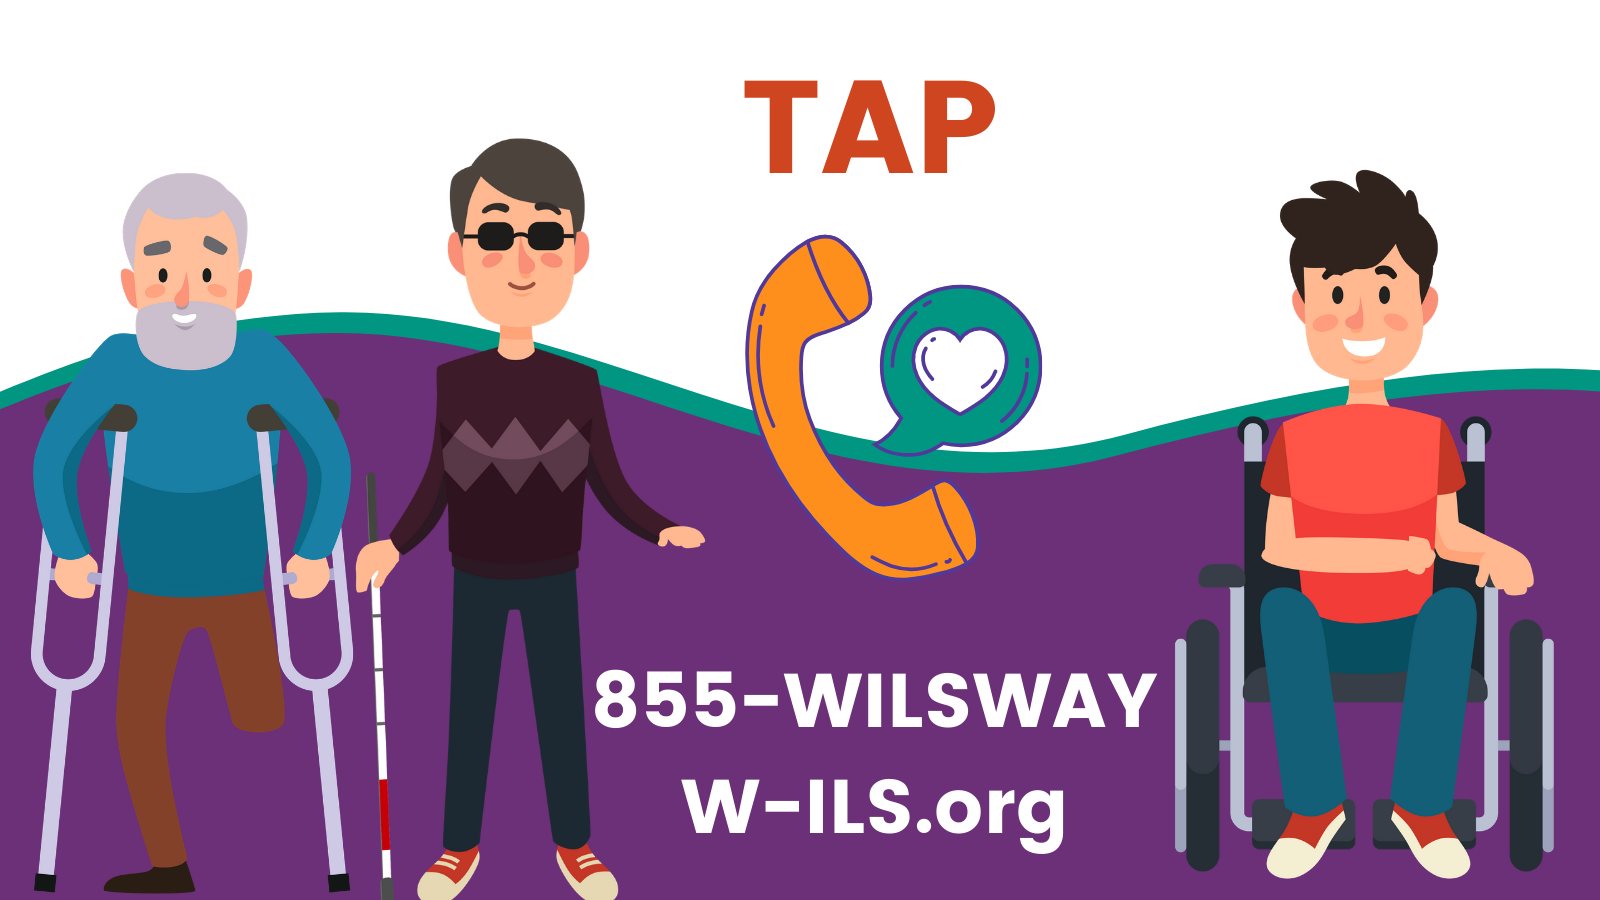 TAP into WILS Telecommunications Access Program by calling 855-WILSWAY or visiting W-ILS.org